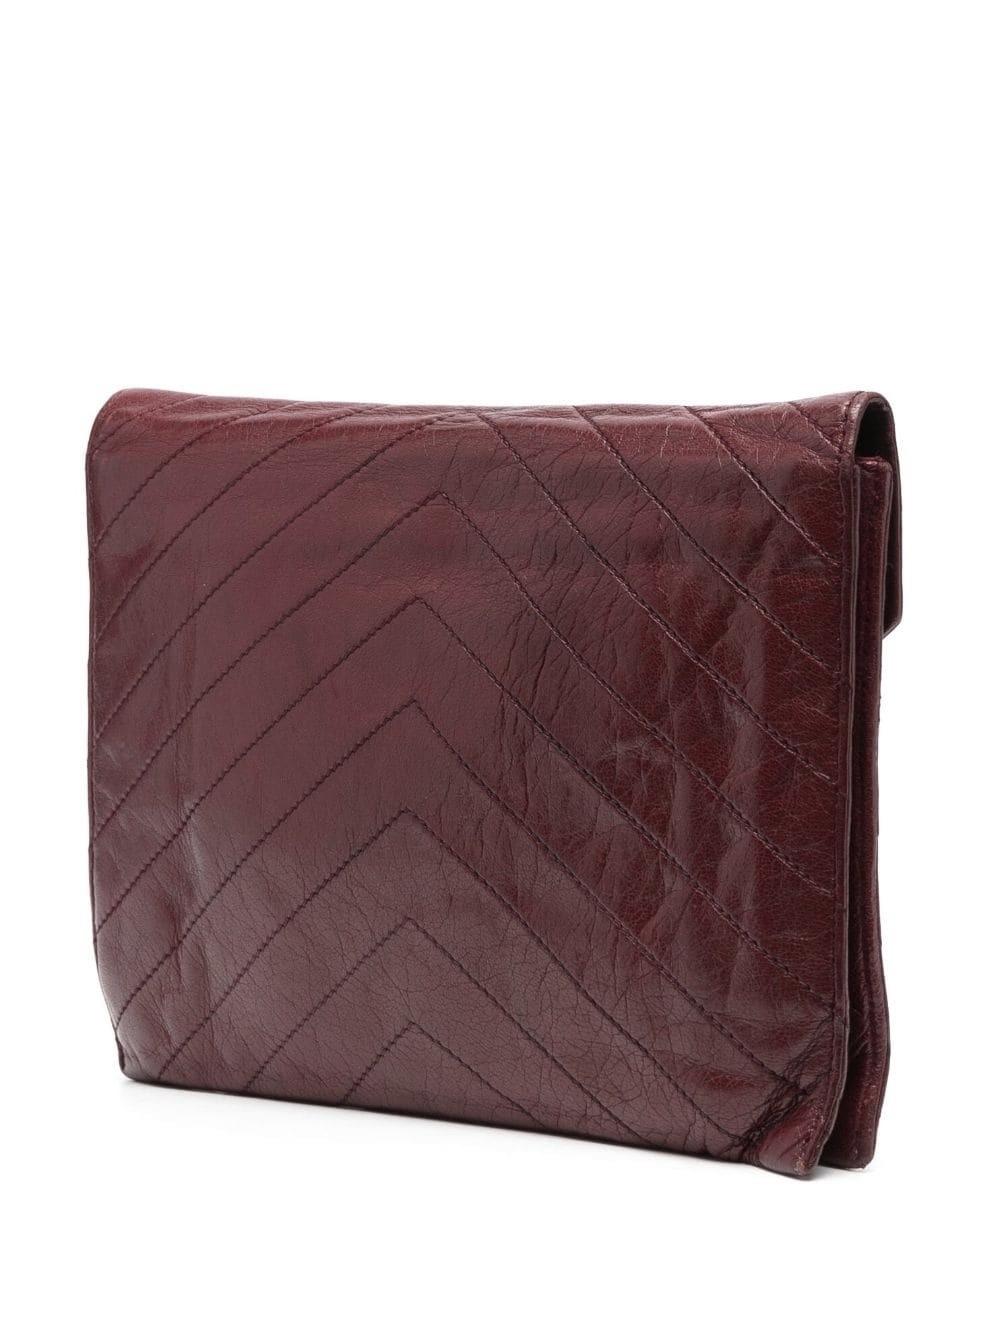 Yves Saint Laurent YSL bordeaux calf leather quilted clutch bag featuring a chevron-quilted pattern, an envelope design, foldover top with magnetic fastening, a zip-fastening compartment, a cotton logo monogram lining, an internal logo stamp.
Circa